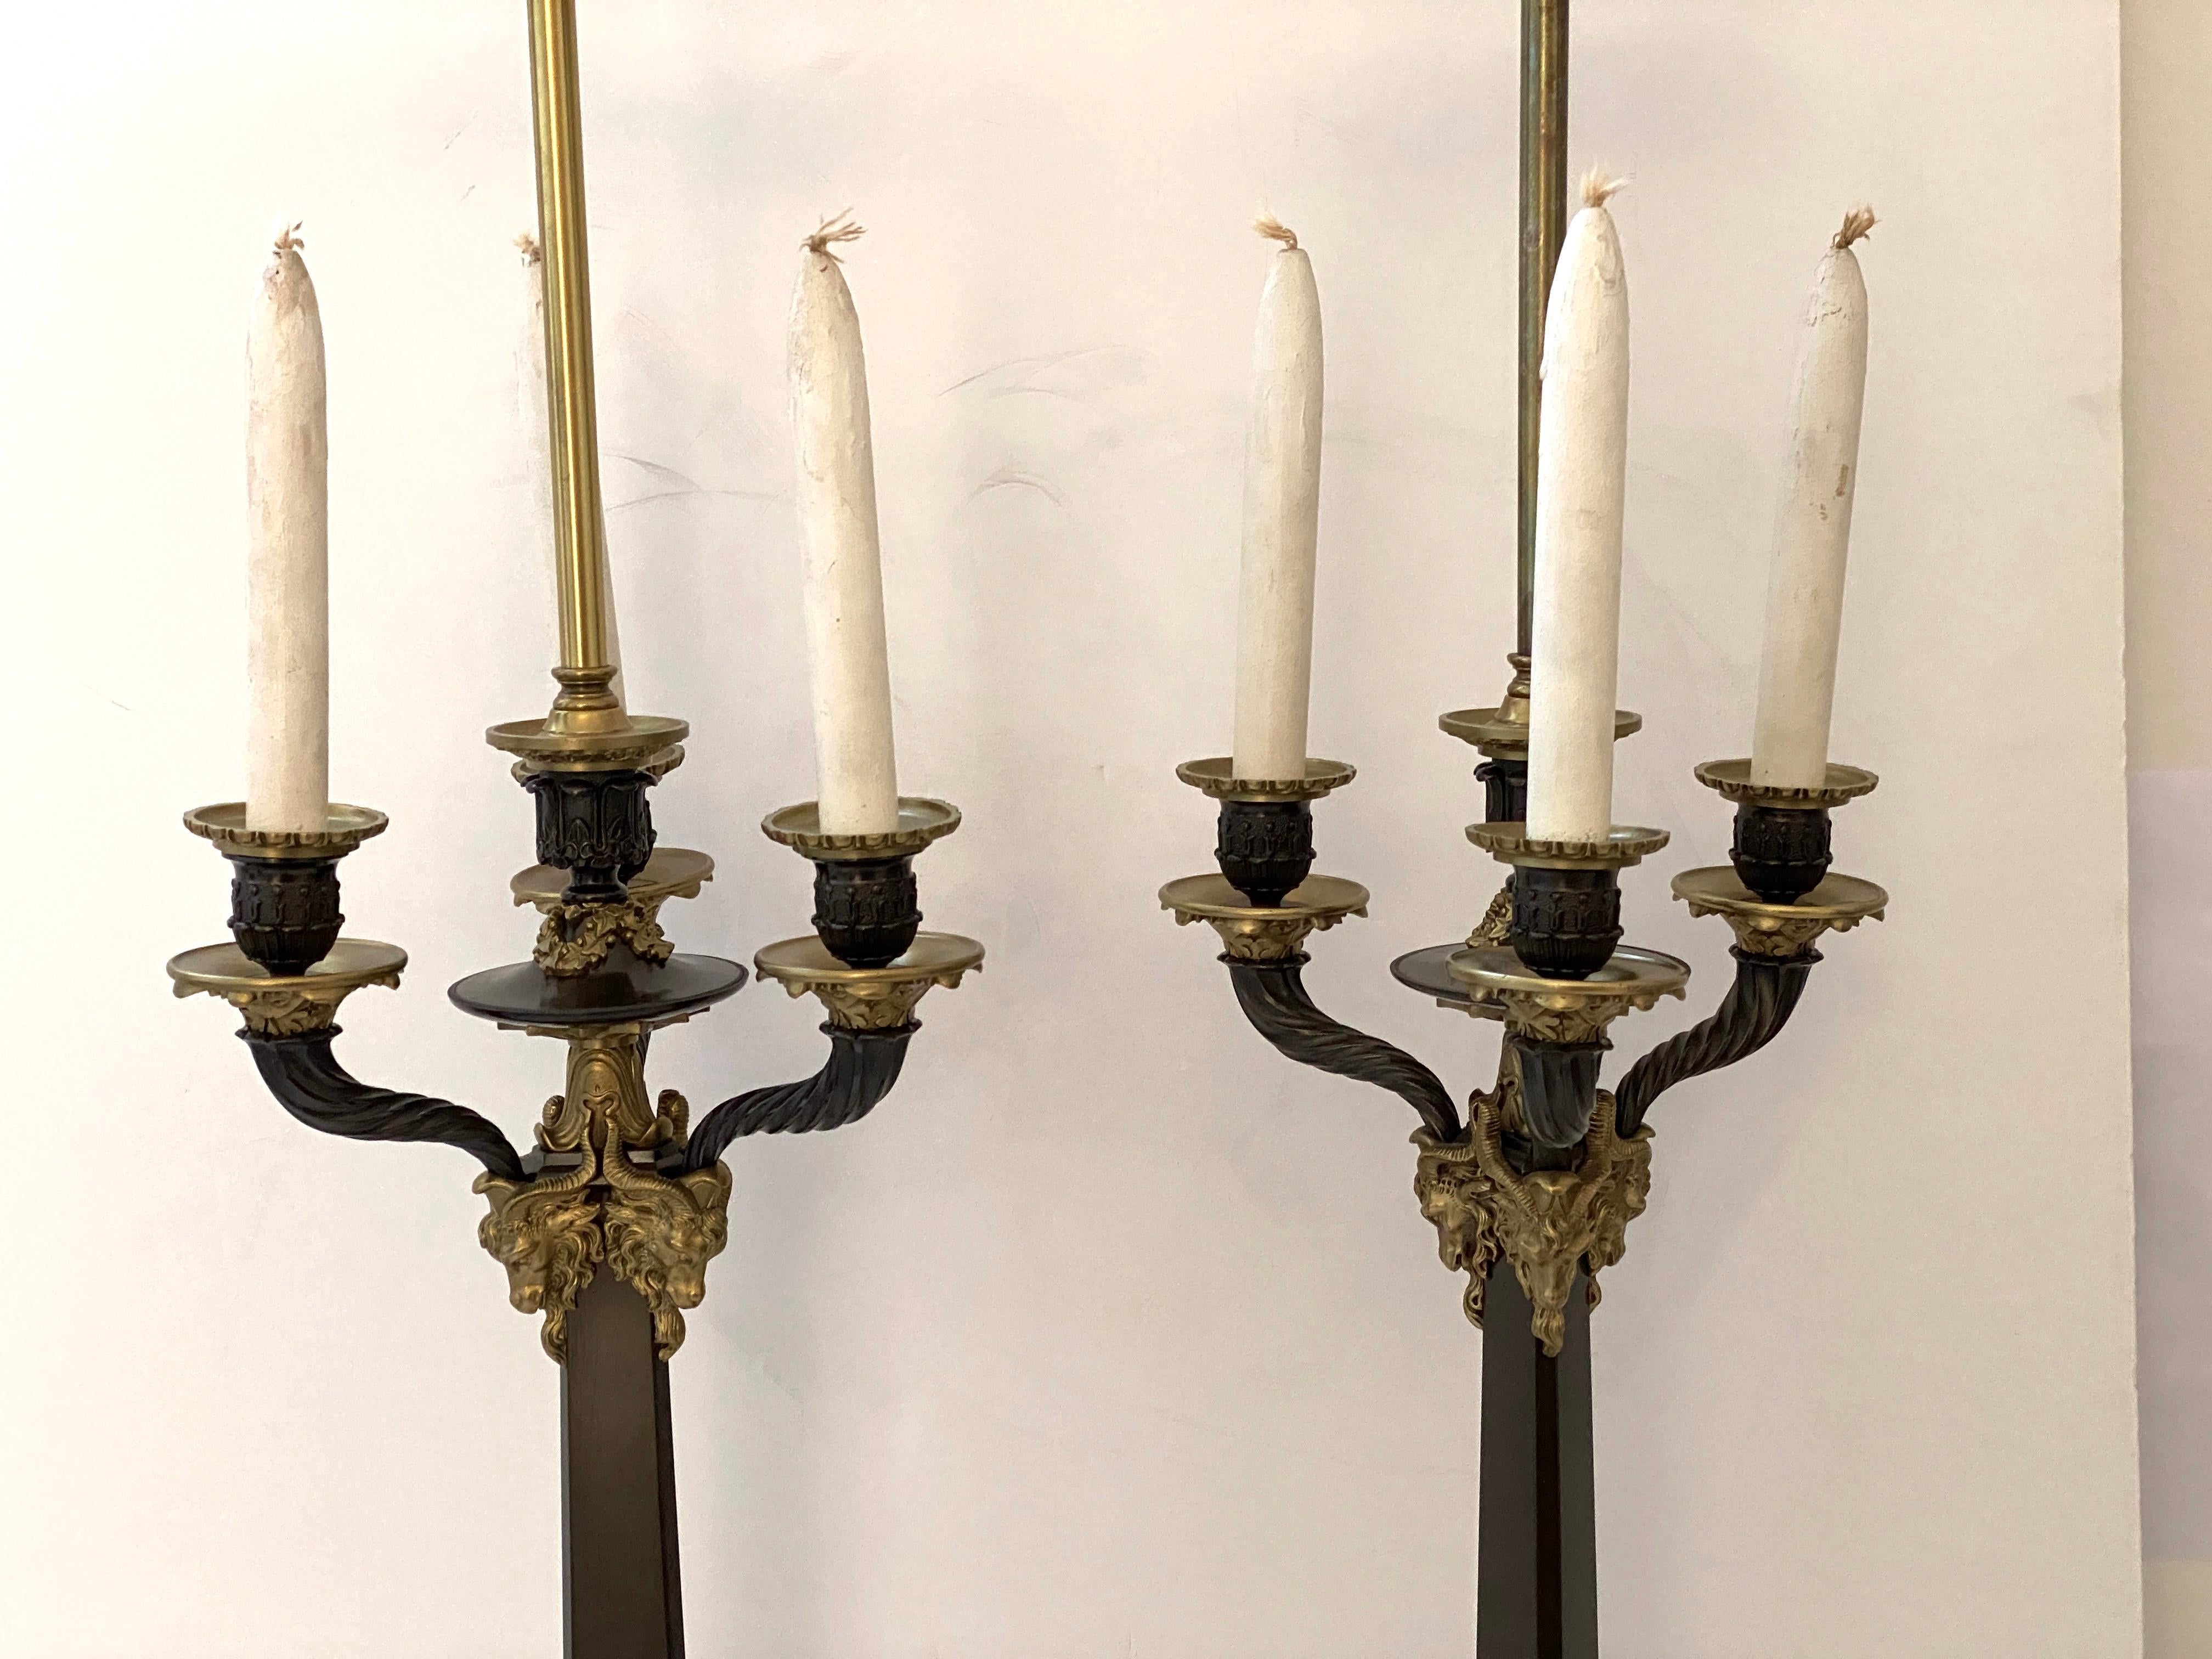 Pair of French Empire Revival Candleabra Table Lamps For Sale 5